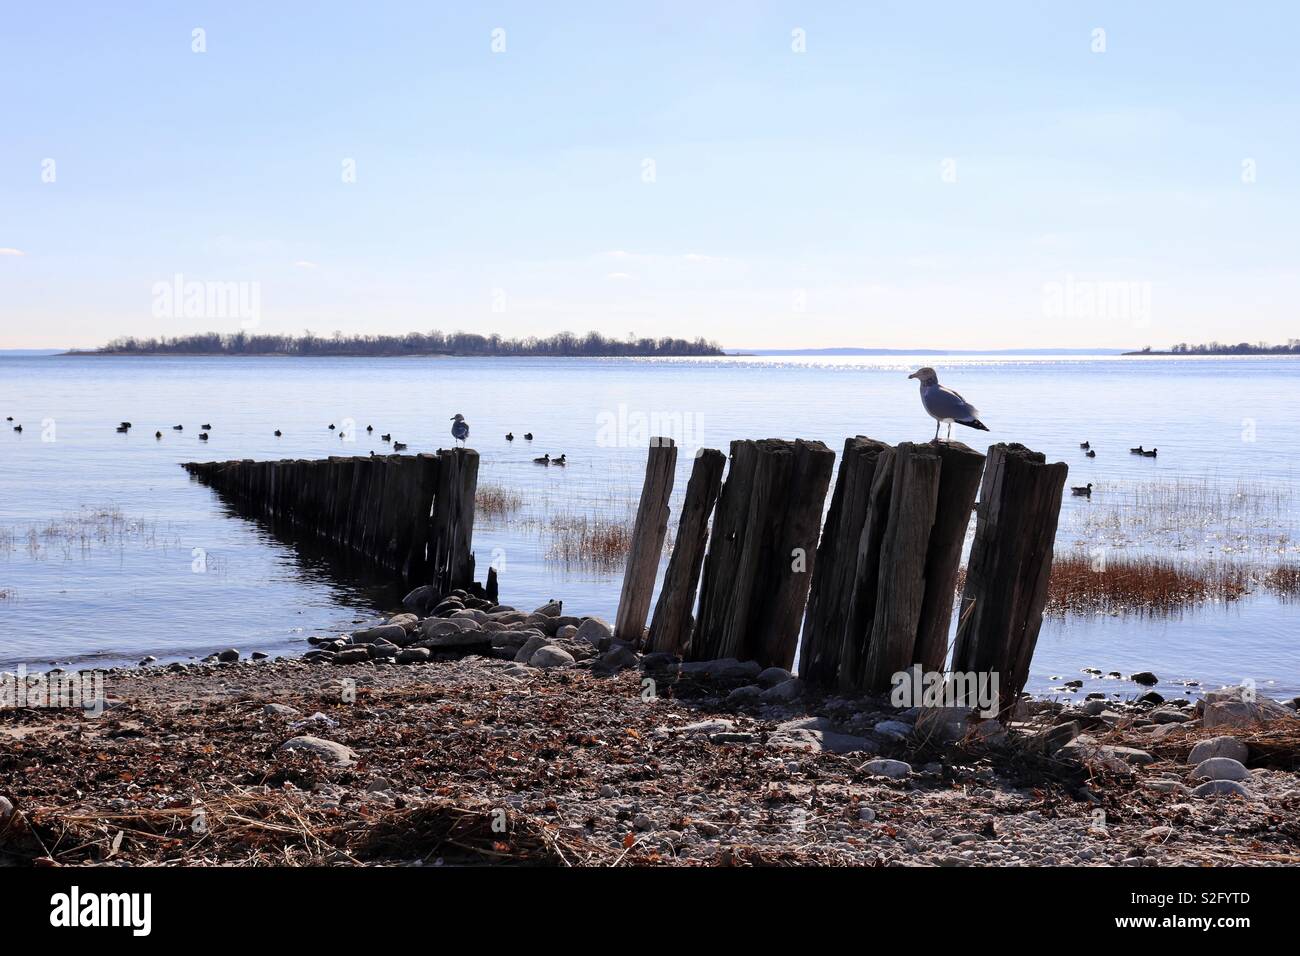 Seagulls standing on remains of old wooden fence Stock Photo